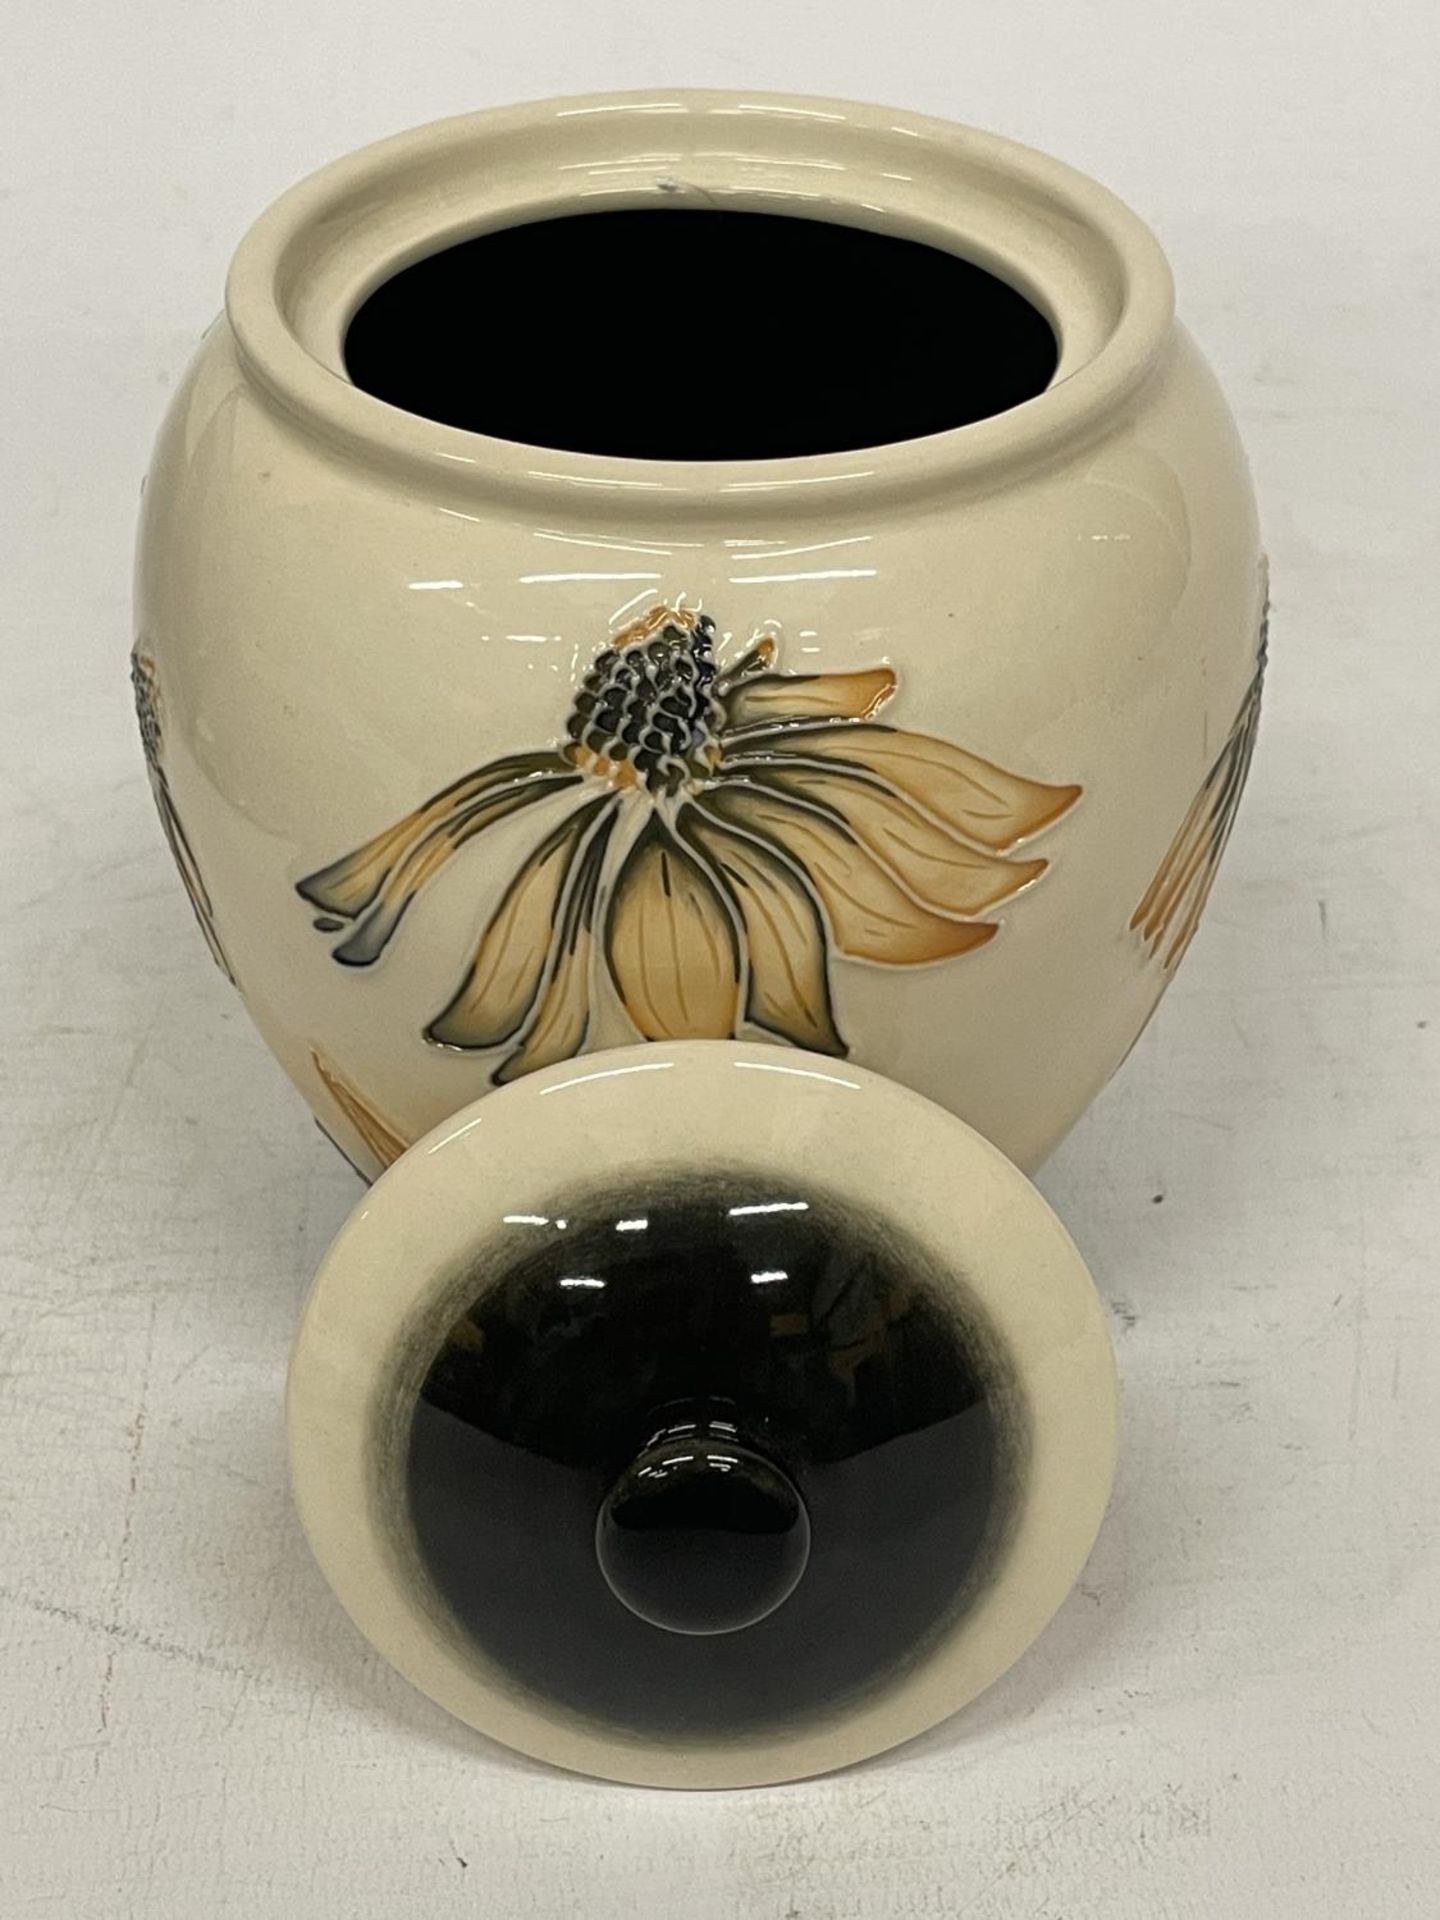 A MOORCROFT GINGER JAR IN THE "CORNFLOWER" PATTERN - Image 4 of 5